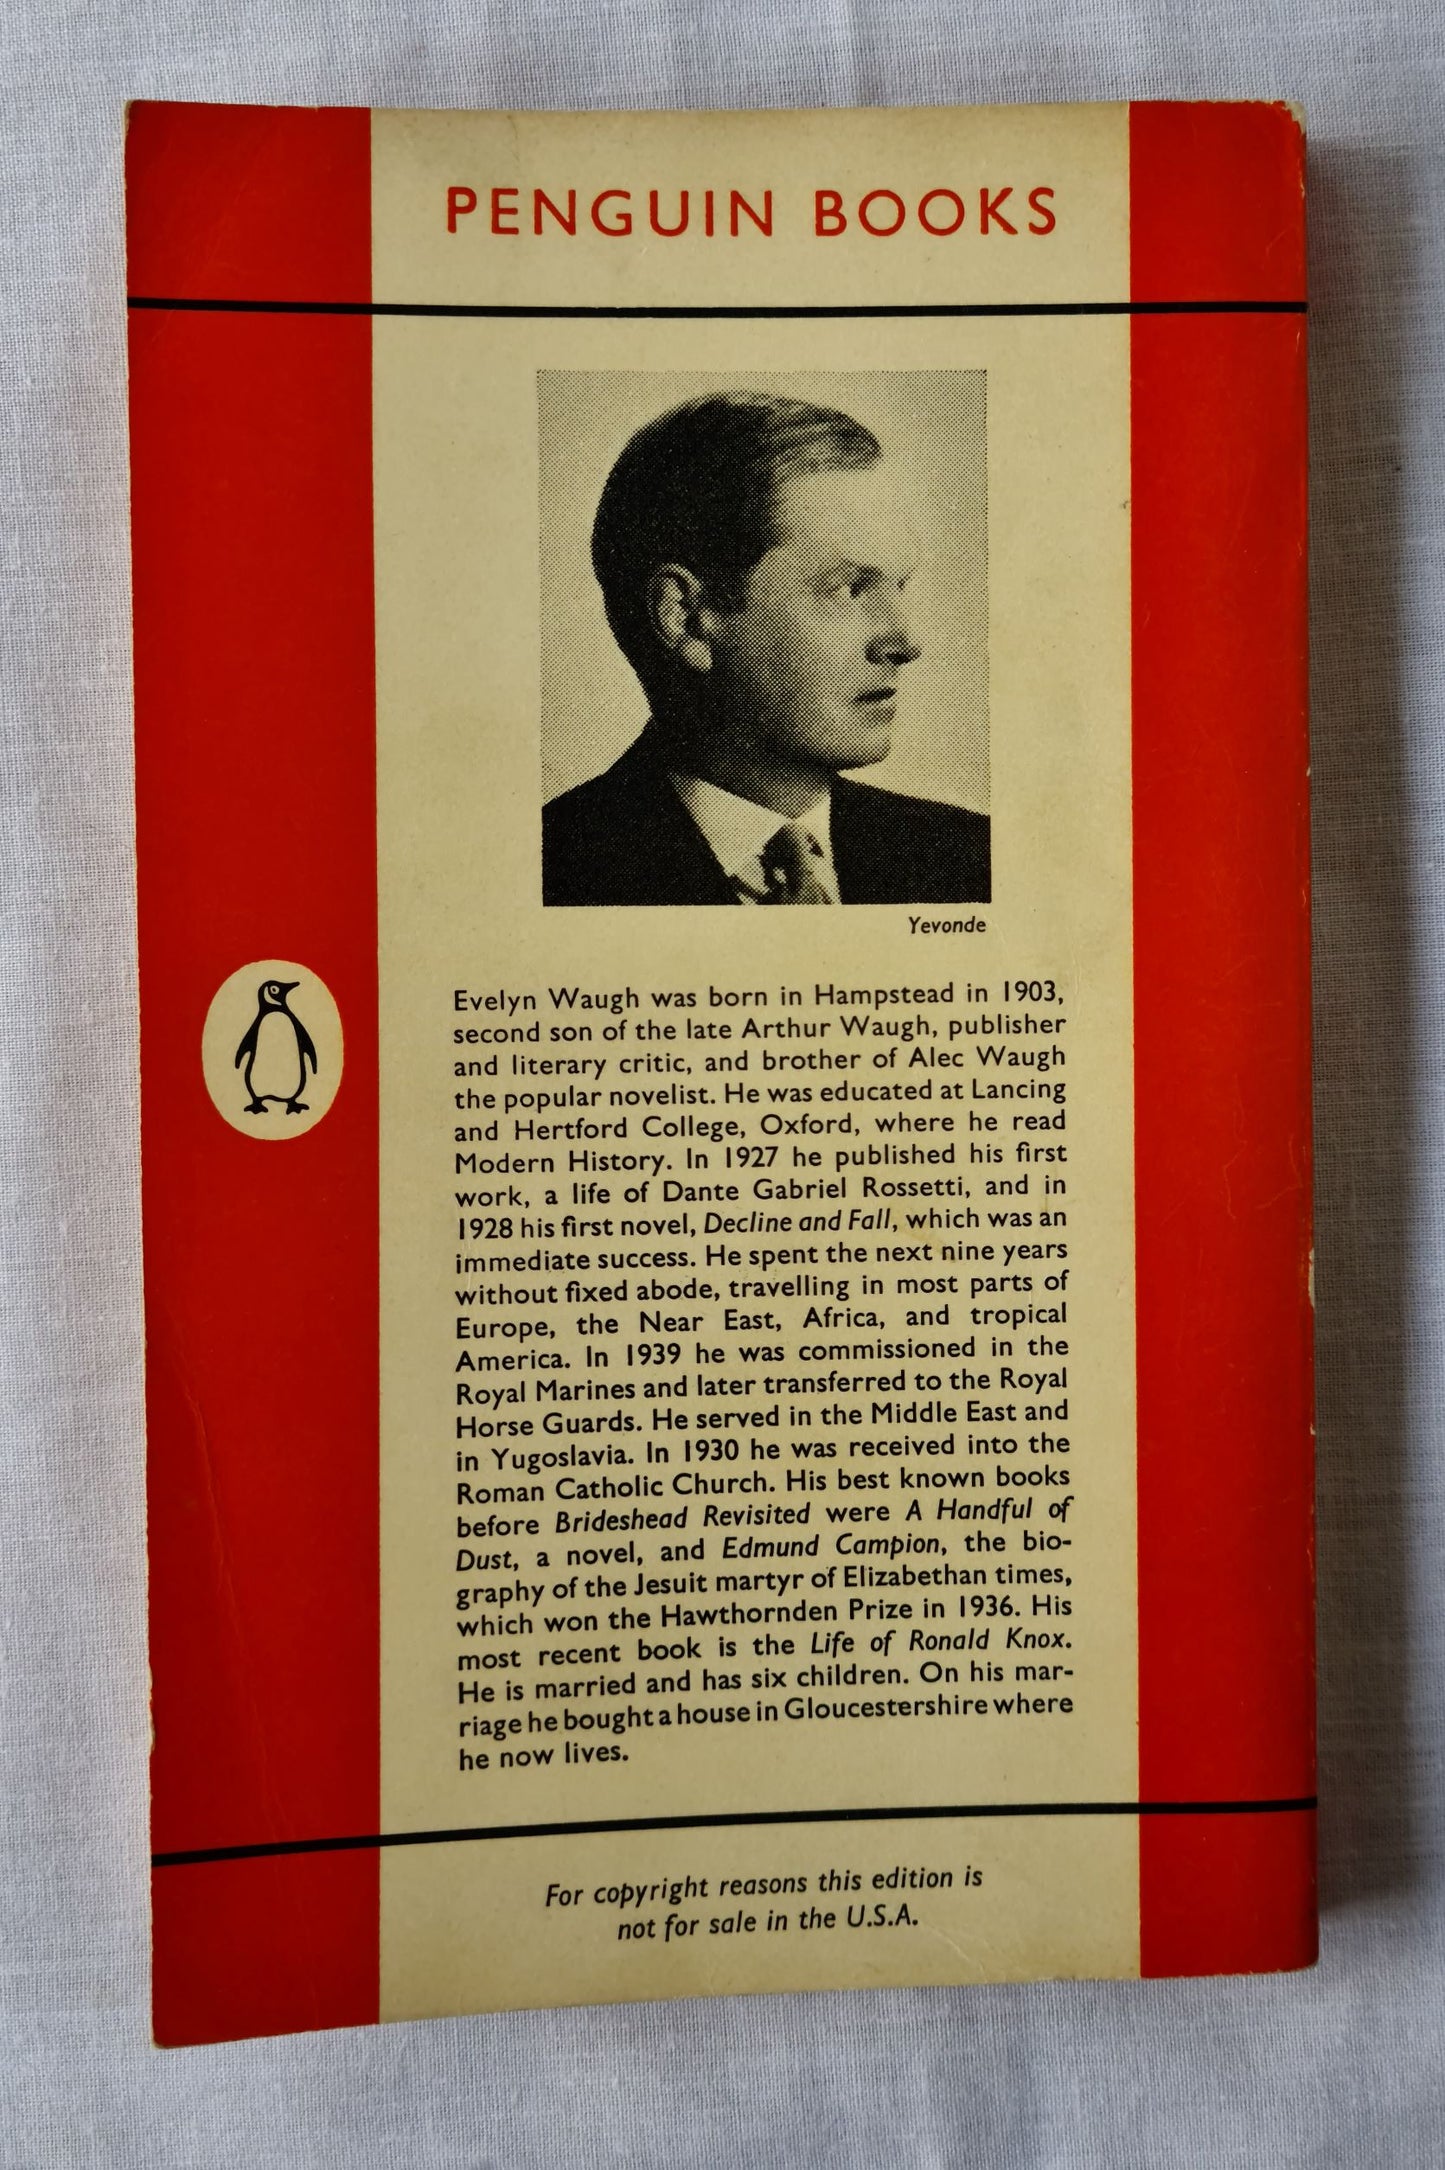 Decline and Fall by Evelyn Waugh